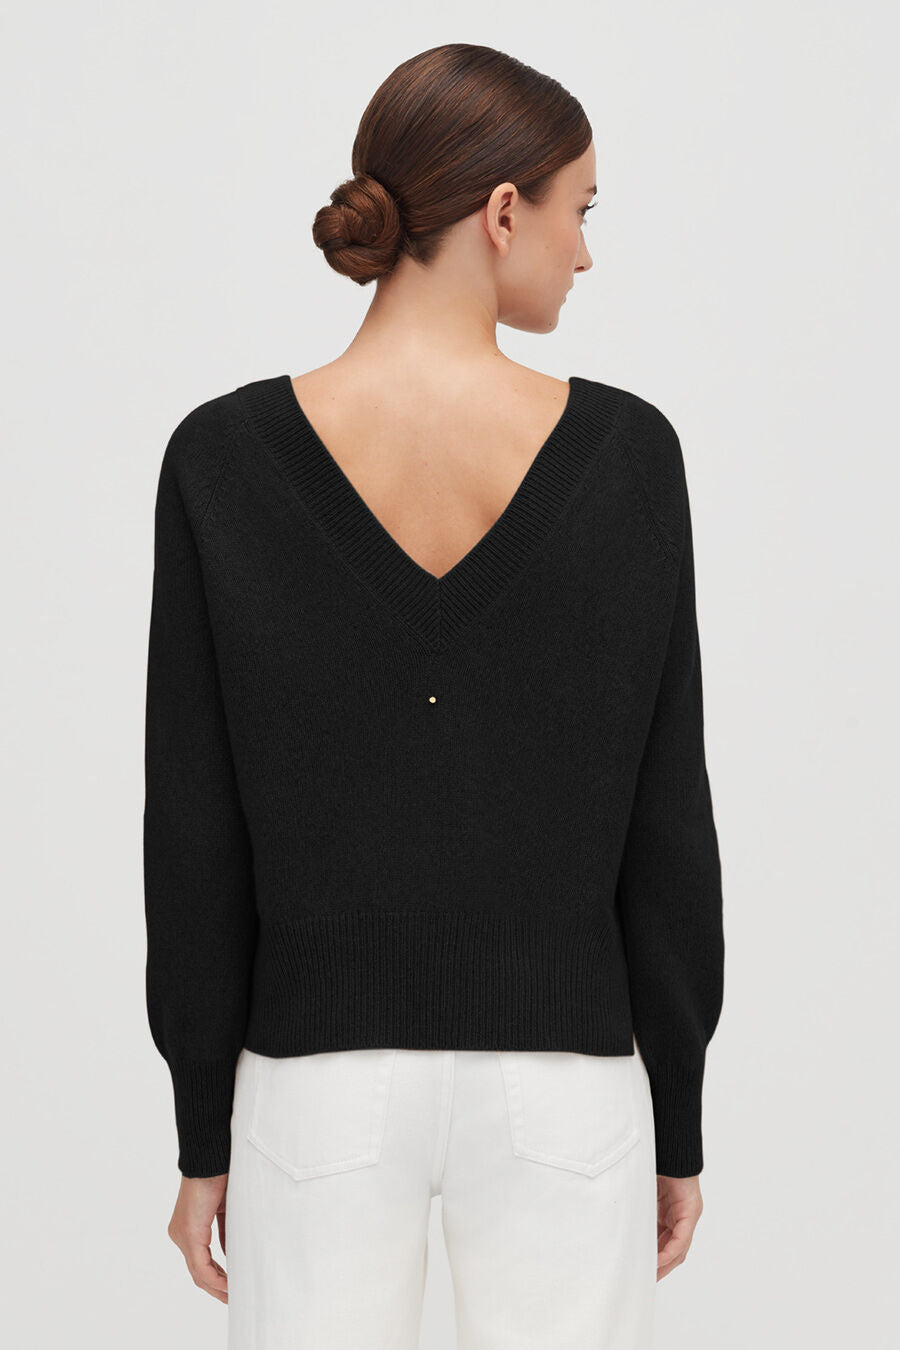 Woman in a v-neck sweater, viewed from the back.